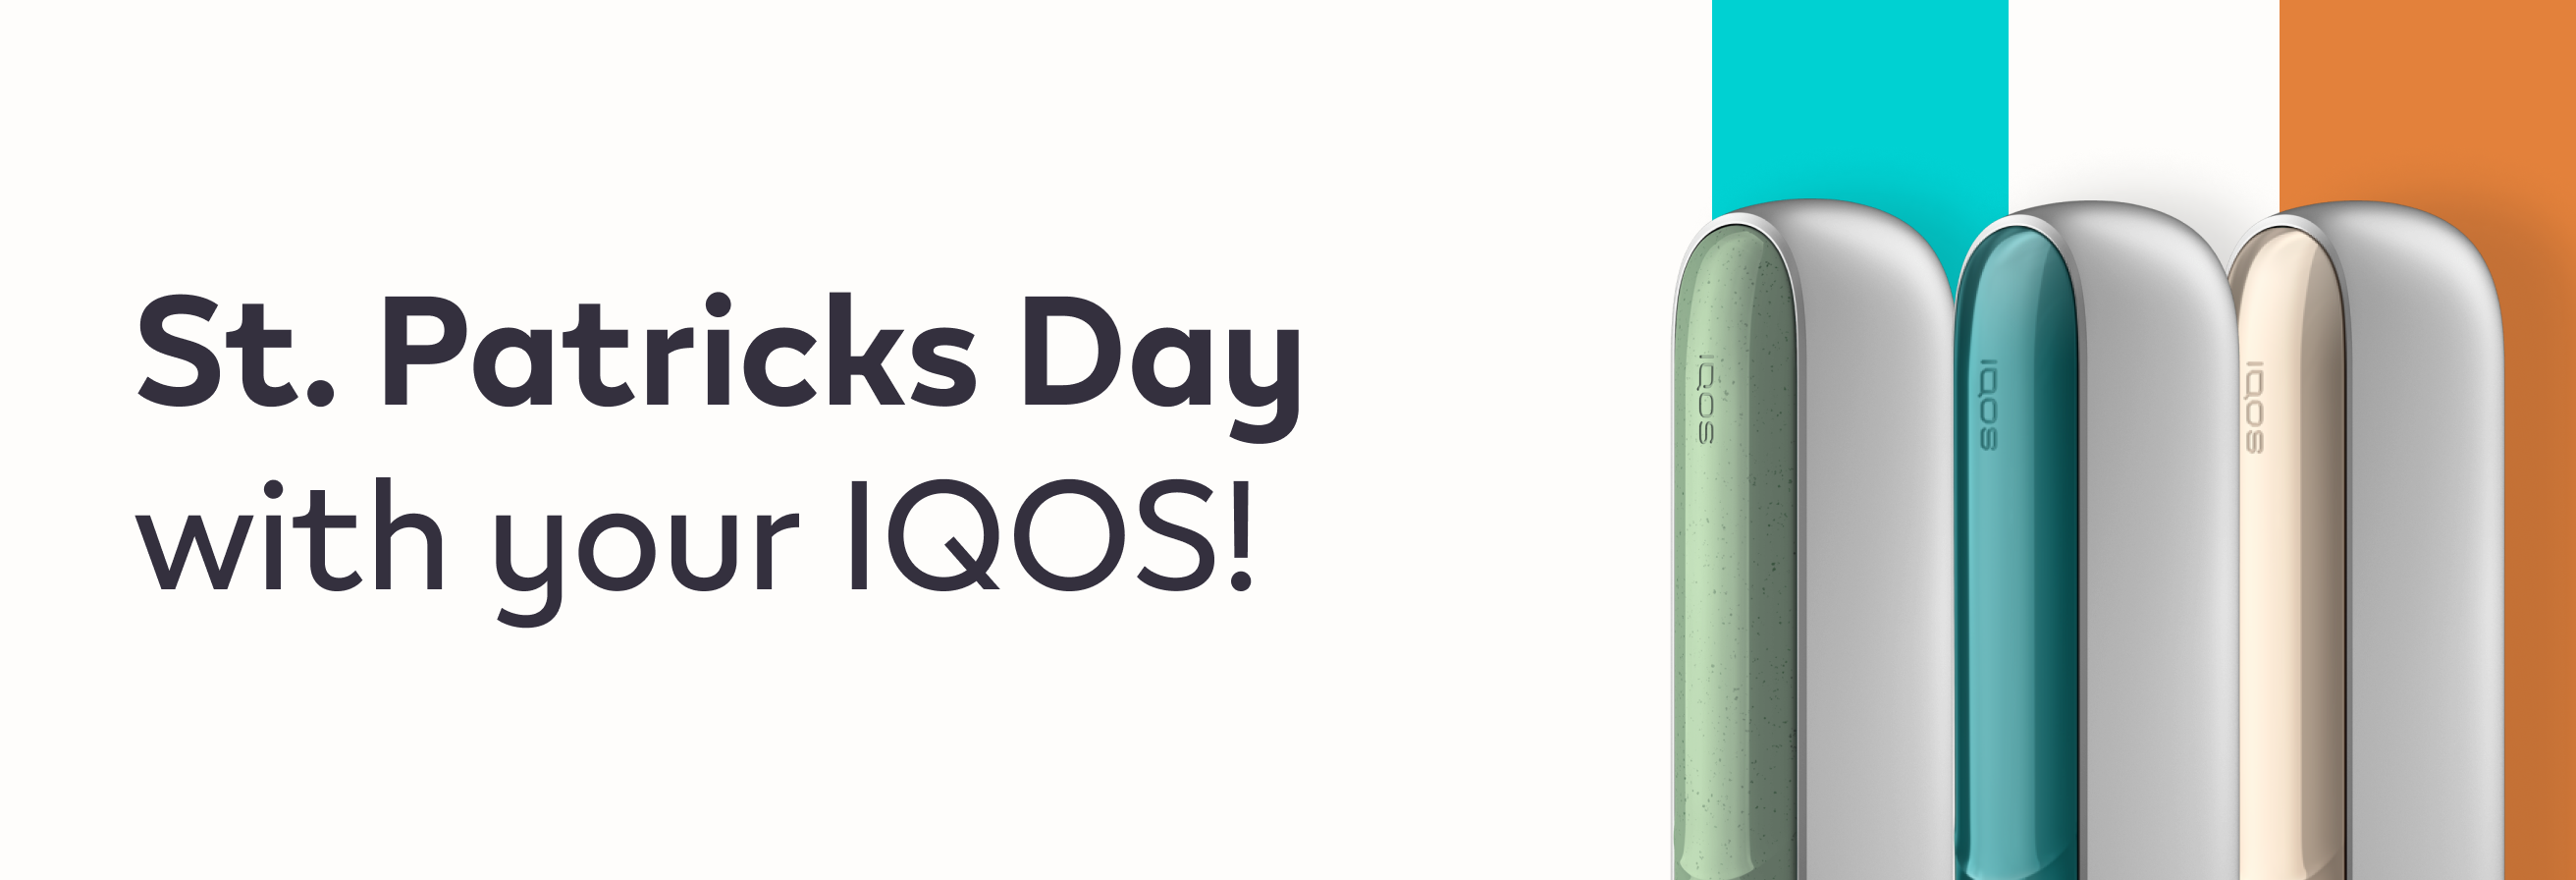 St. Patricks Day with IQOS